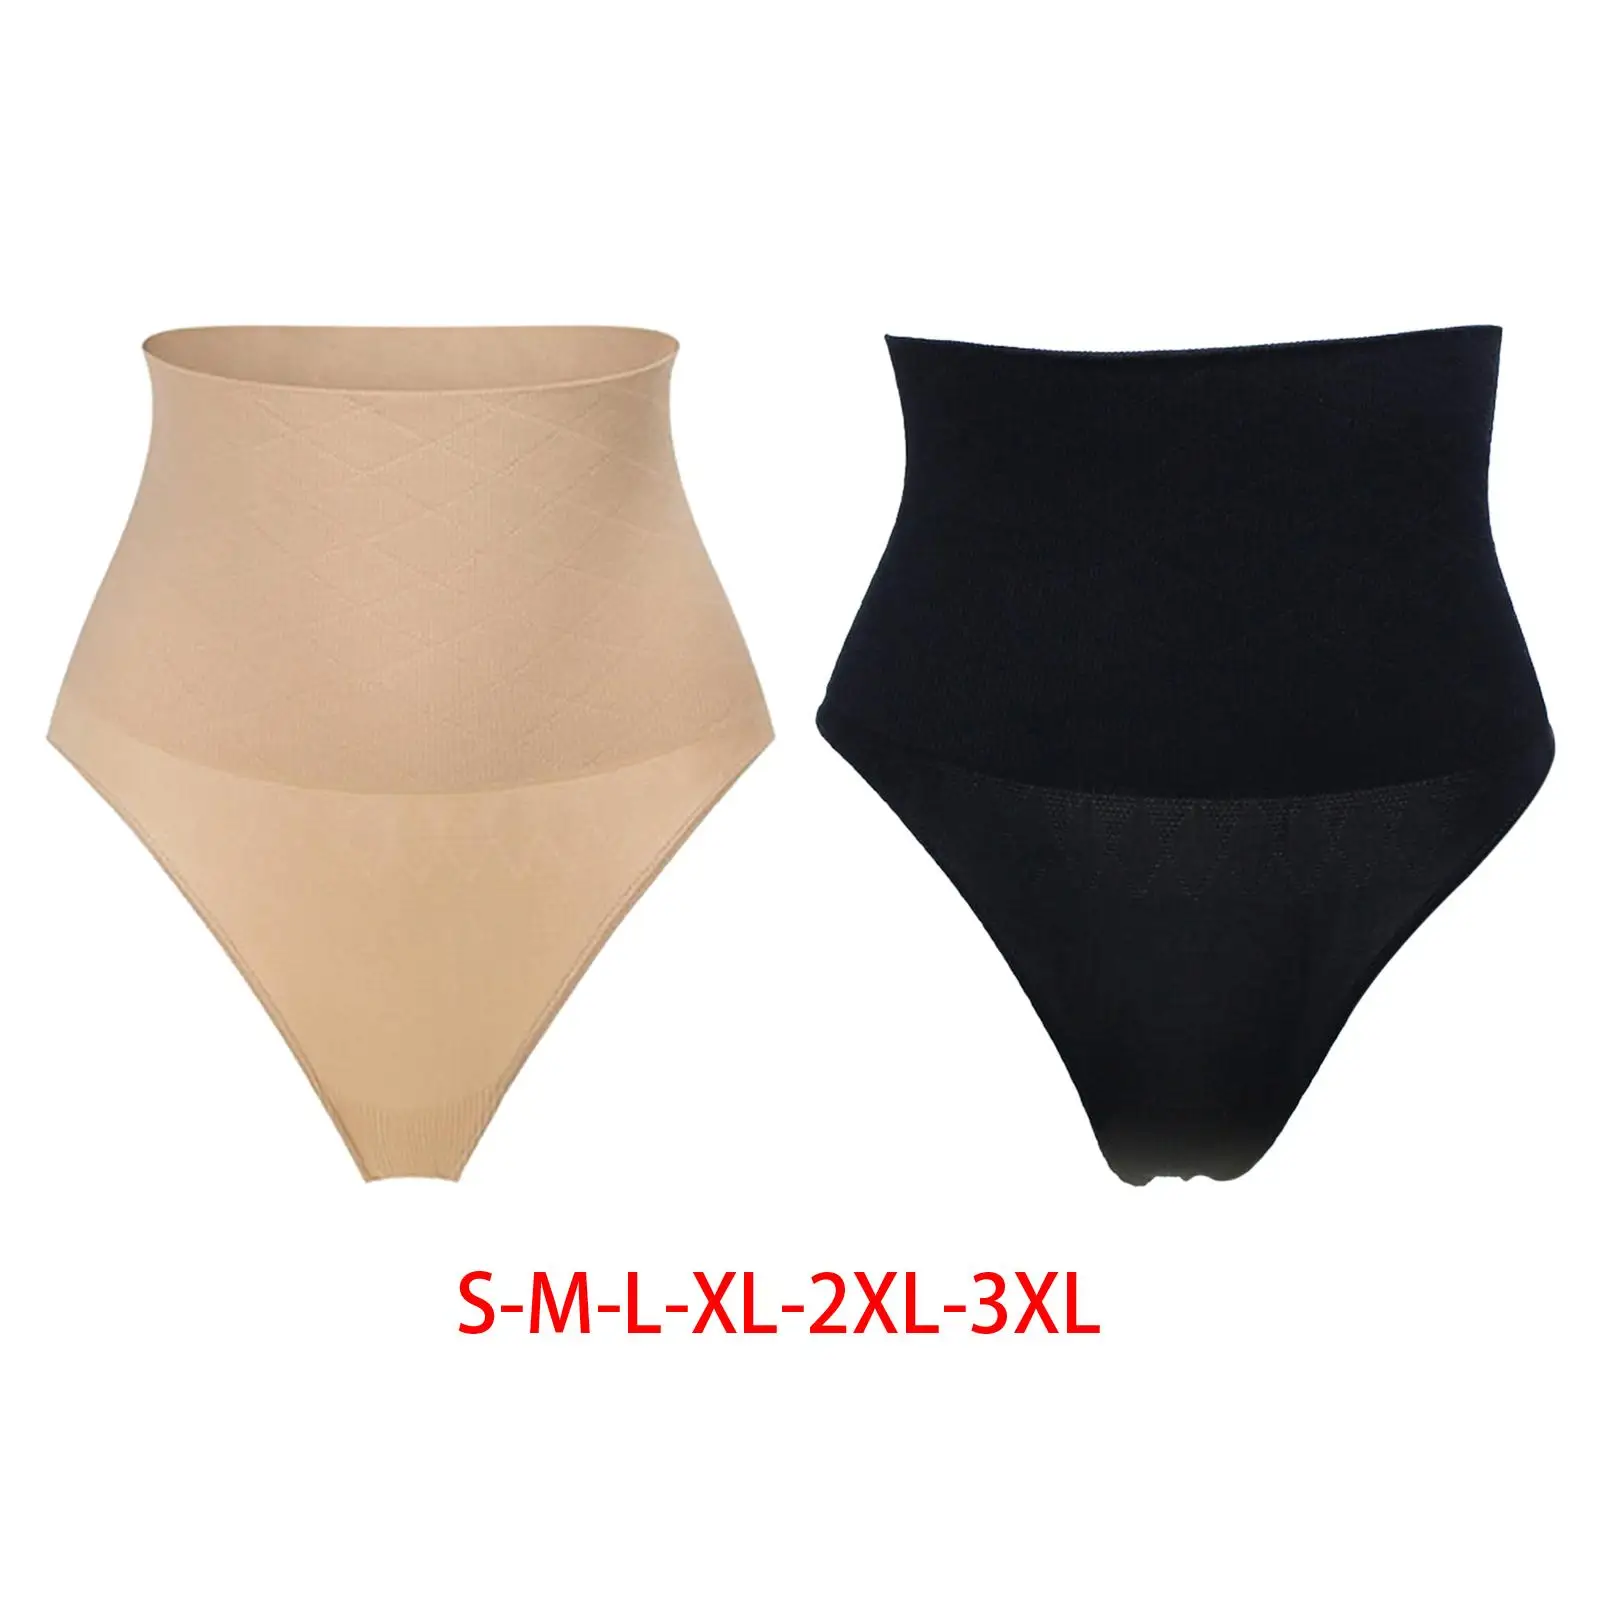 Mid Waist Women wear, Lifting Shaping Pants Trimmer Thong Panties Girl Soft Panties for Exercise Wedding